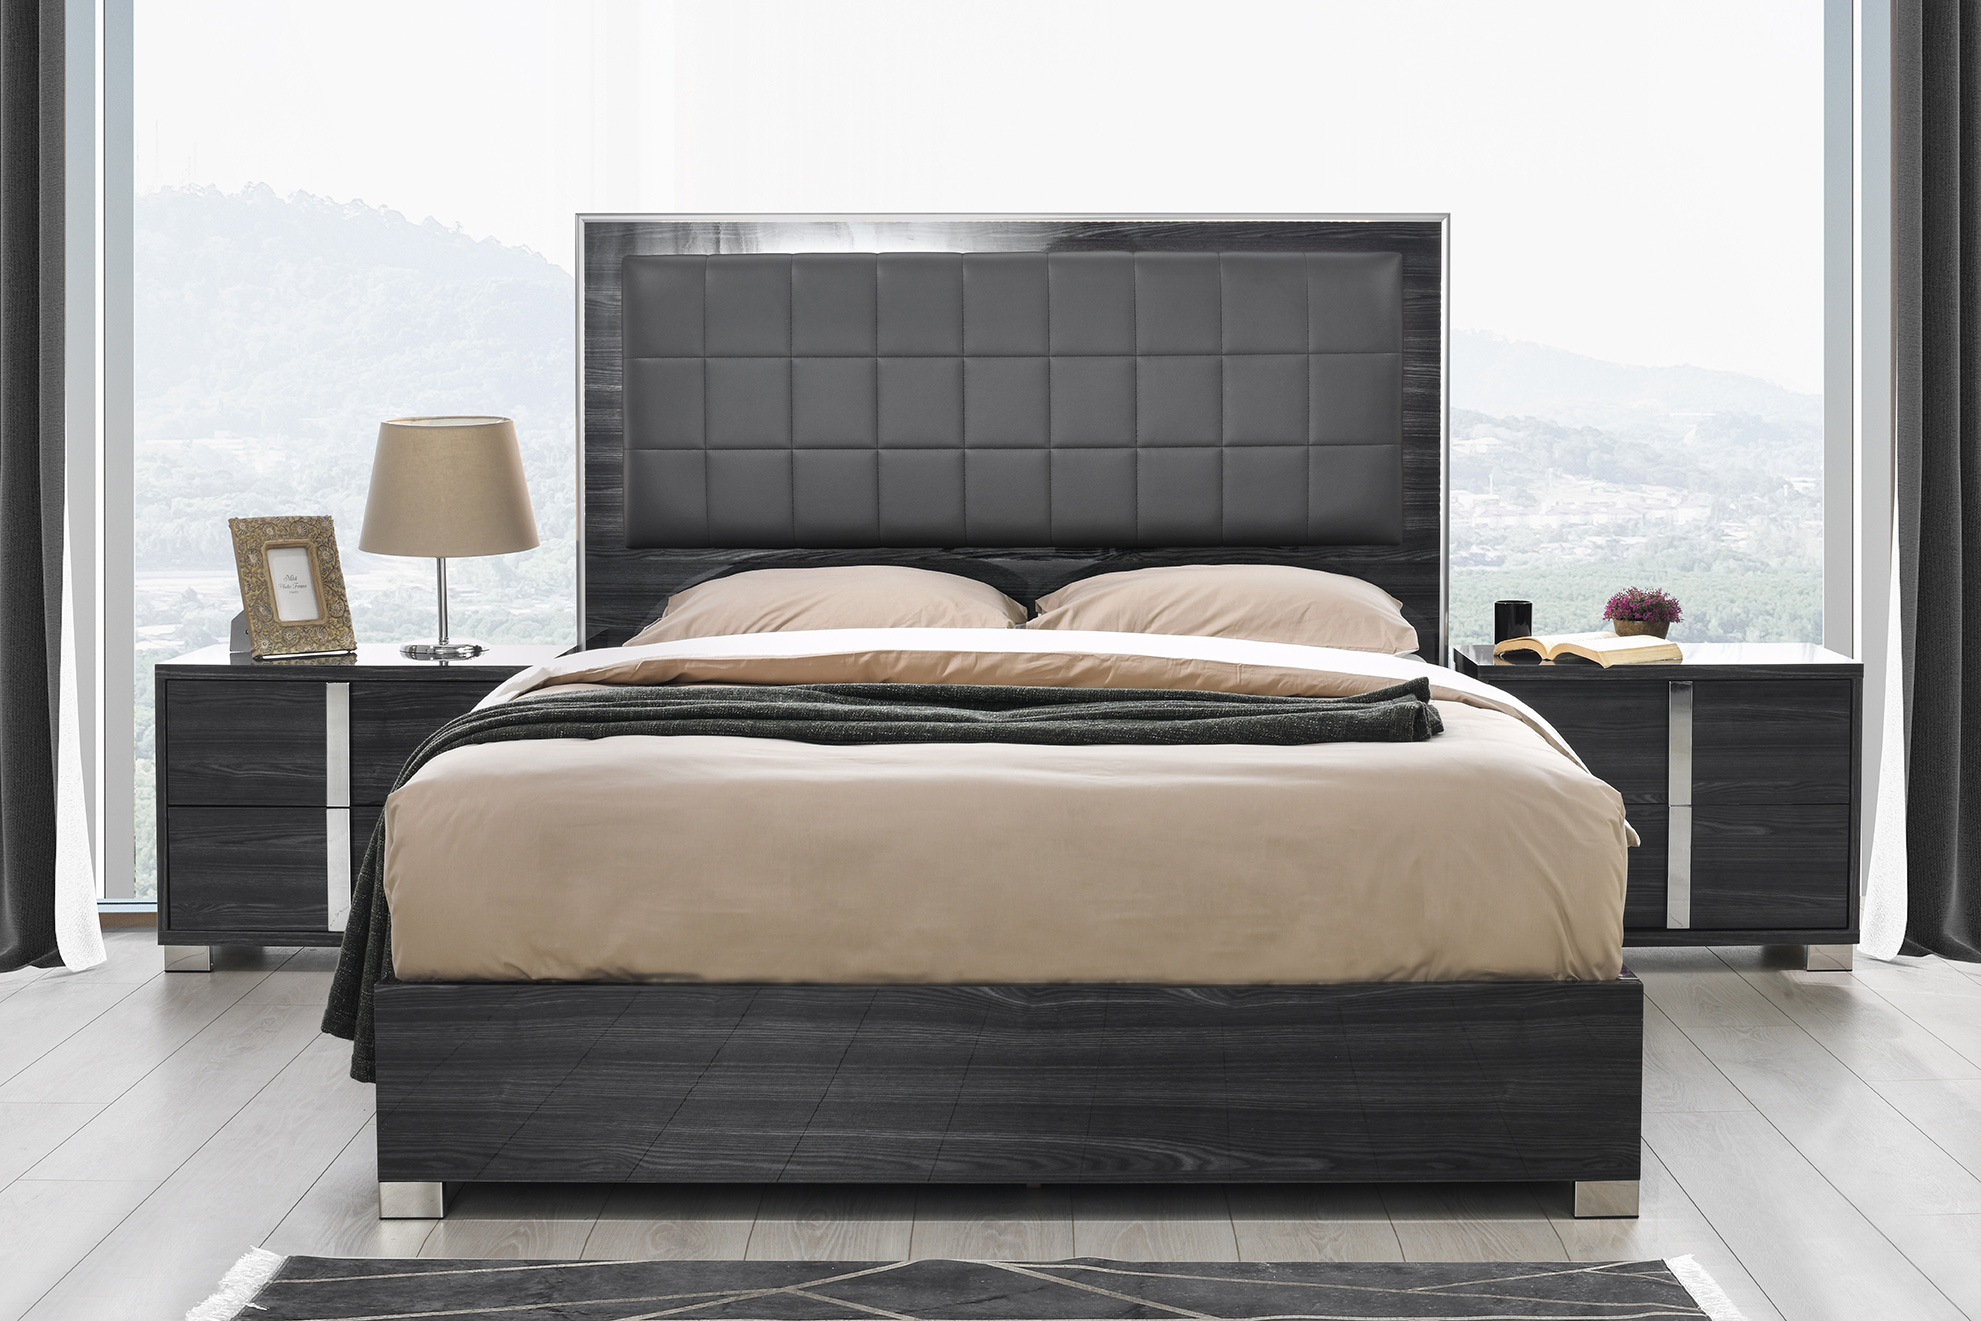 Overnice Wood High End Bedroom Furniture Sets feat Lacquered Bed - Click Image to Close